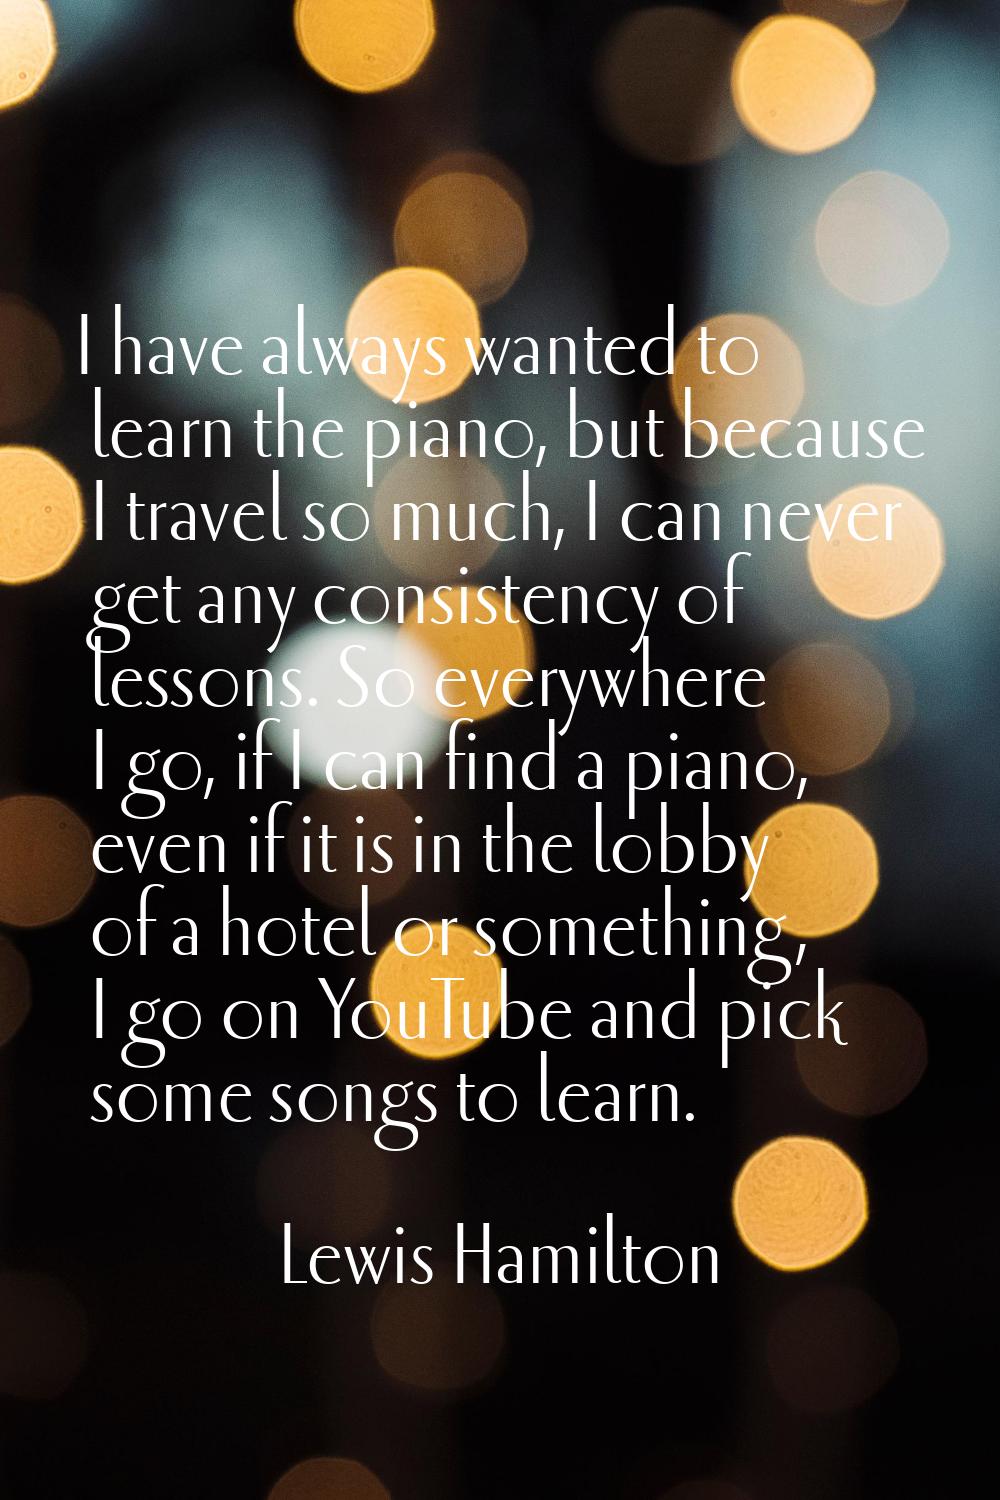 I have always wanted to learn the piano, but because I travel so much, I can never get any consiste